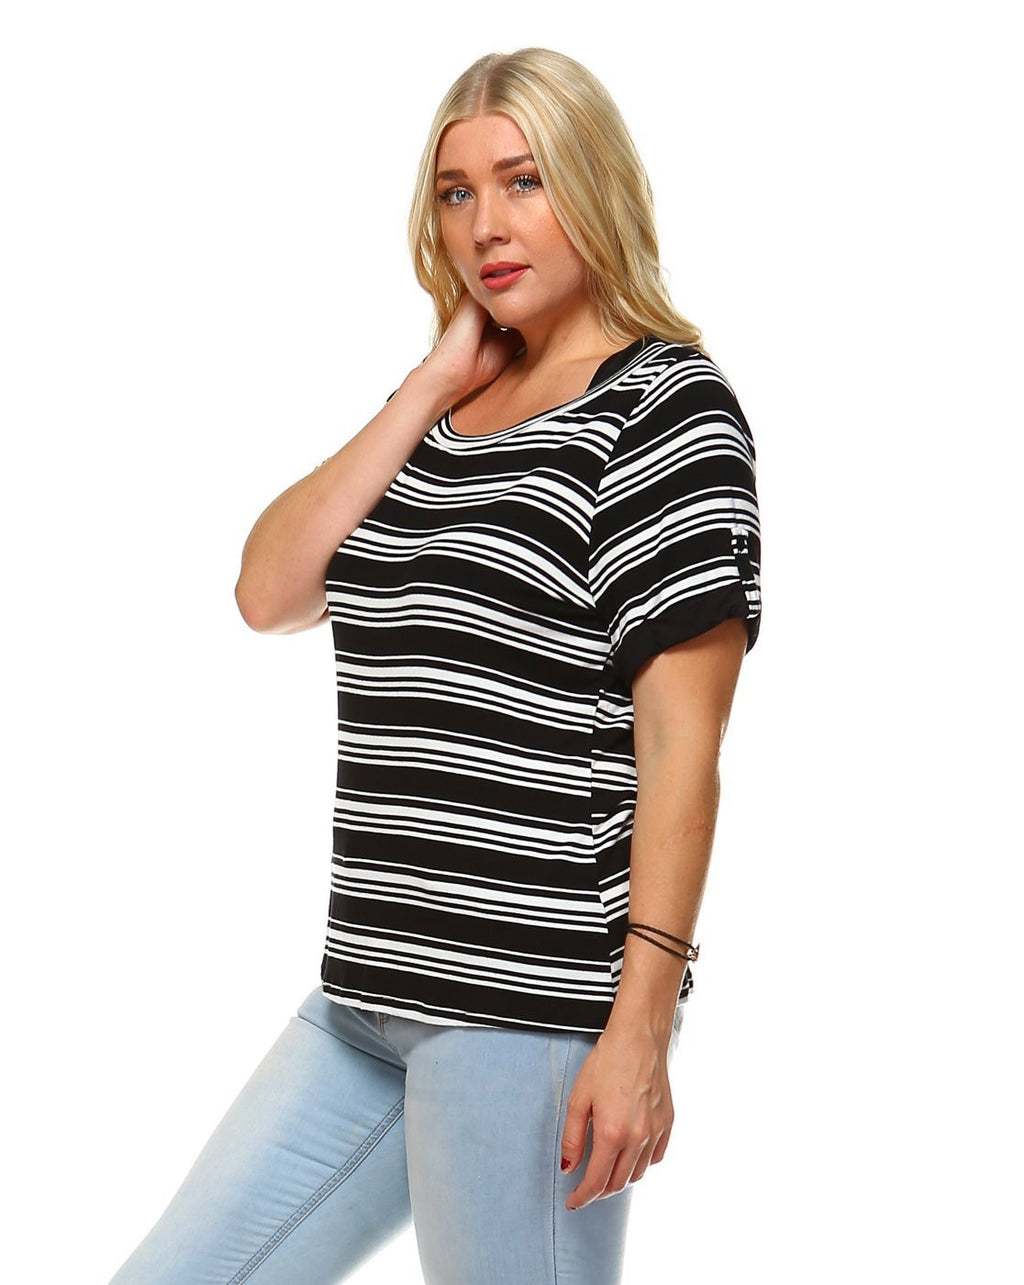 Black and white Striped Scoop neck Boyfriend tee with Fold-over sleeve  Perfect for any activity,relaxing day,beautiful and unique,comfortable and flattering